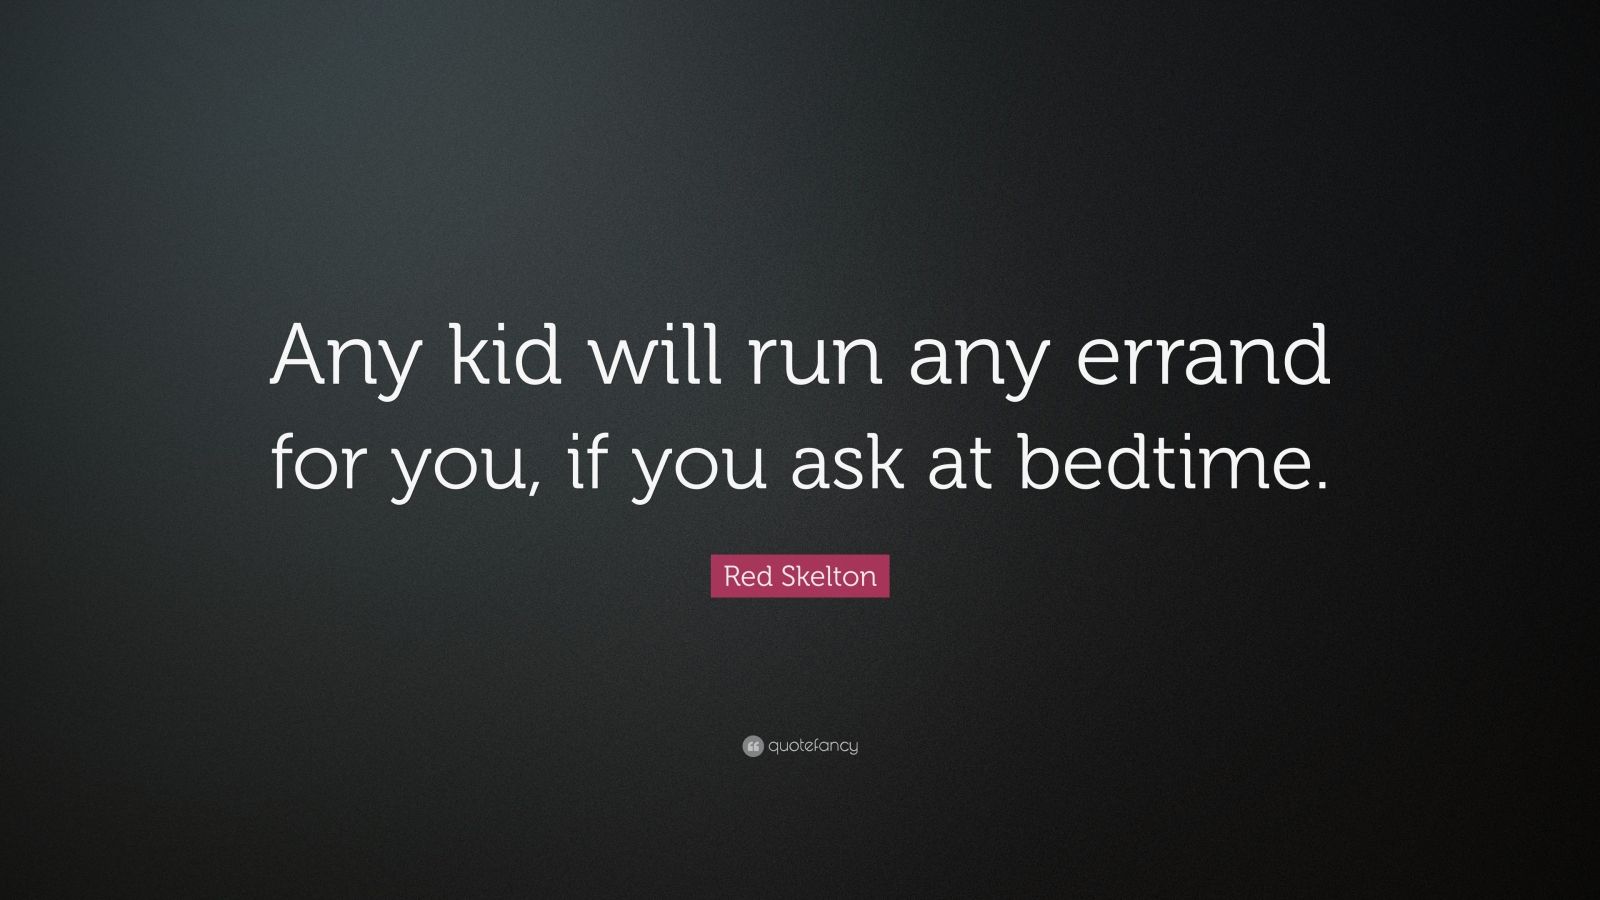 “Any kid will run any errand for you, if you ask at bedtime.” – Red Skelton